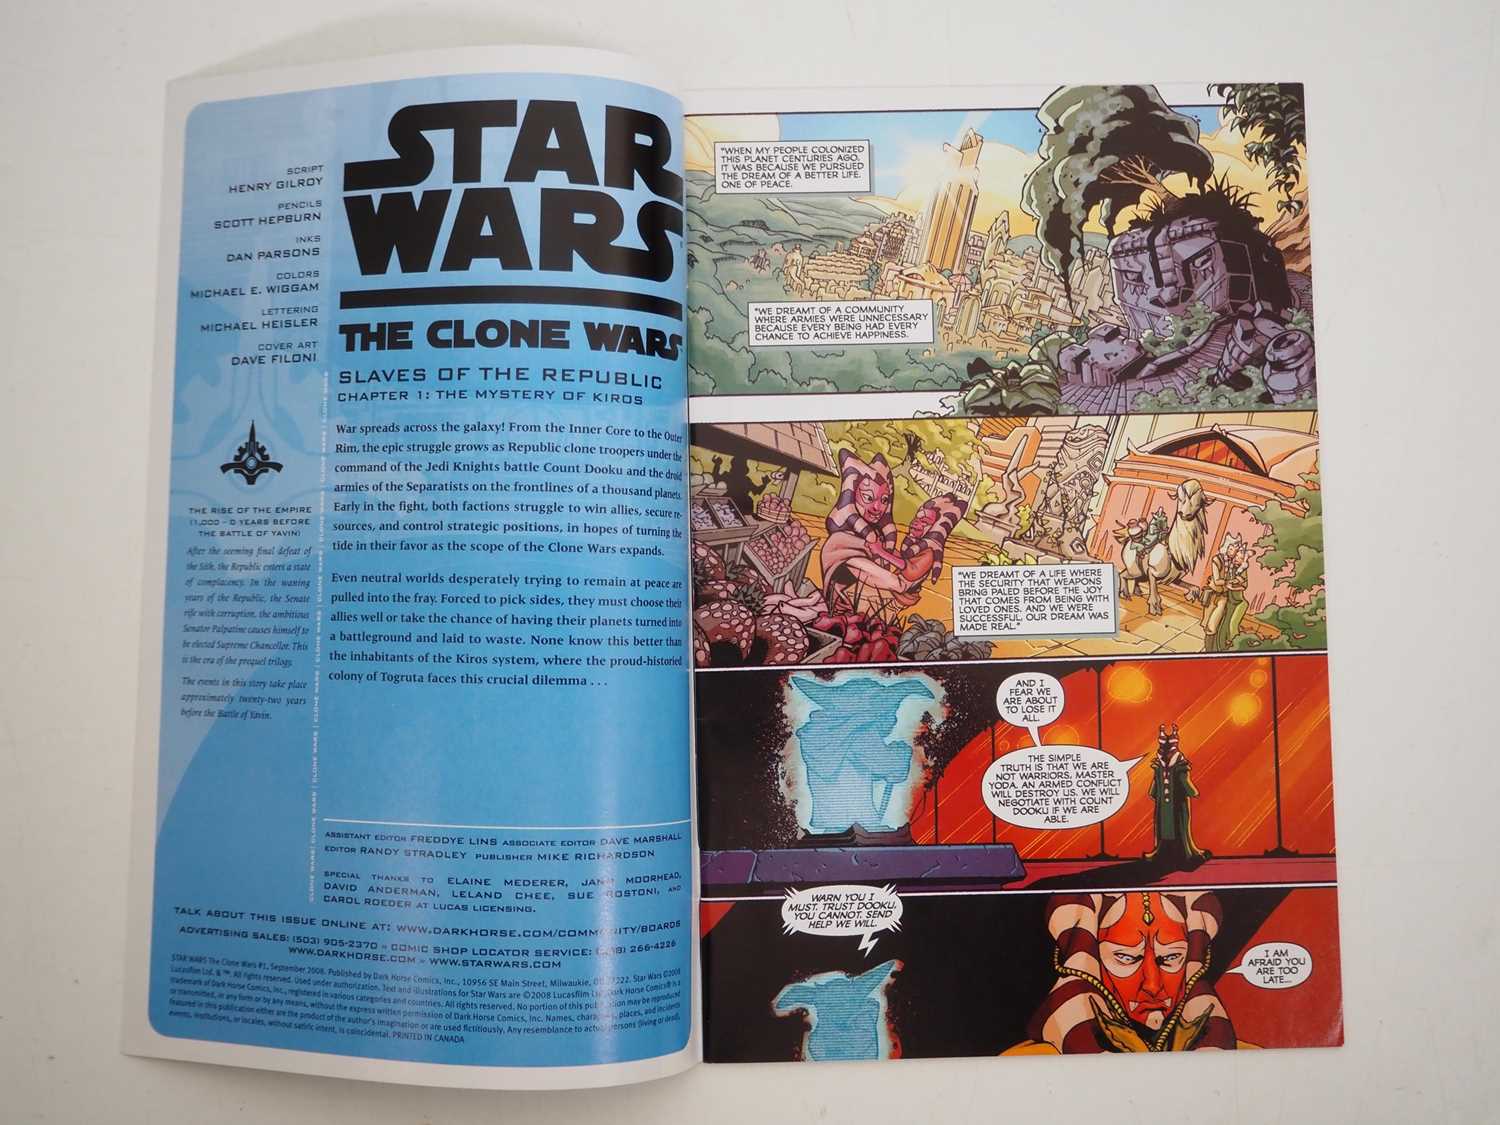 STAR WARS: THE CLONE WARS #1 (2008 - DARK HORSE) - Includes the first appearance of Ahsoka Tano + - Image 3 of 9